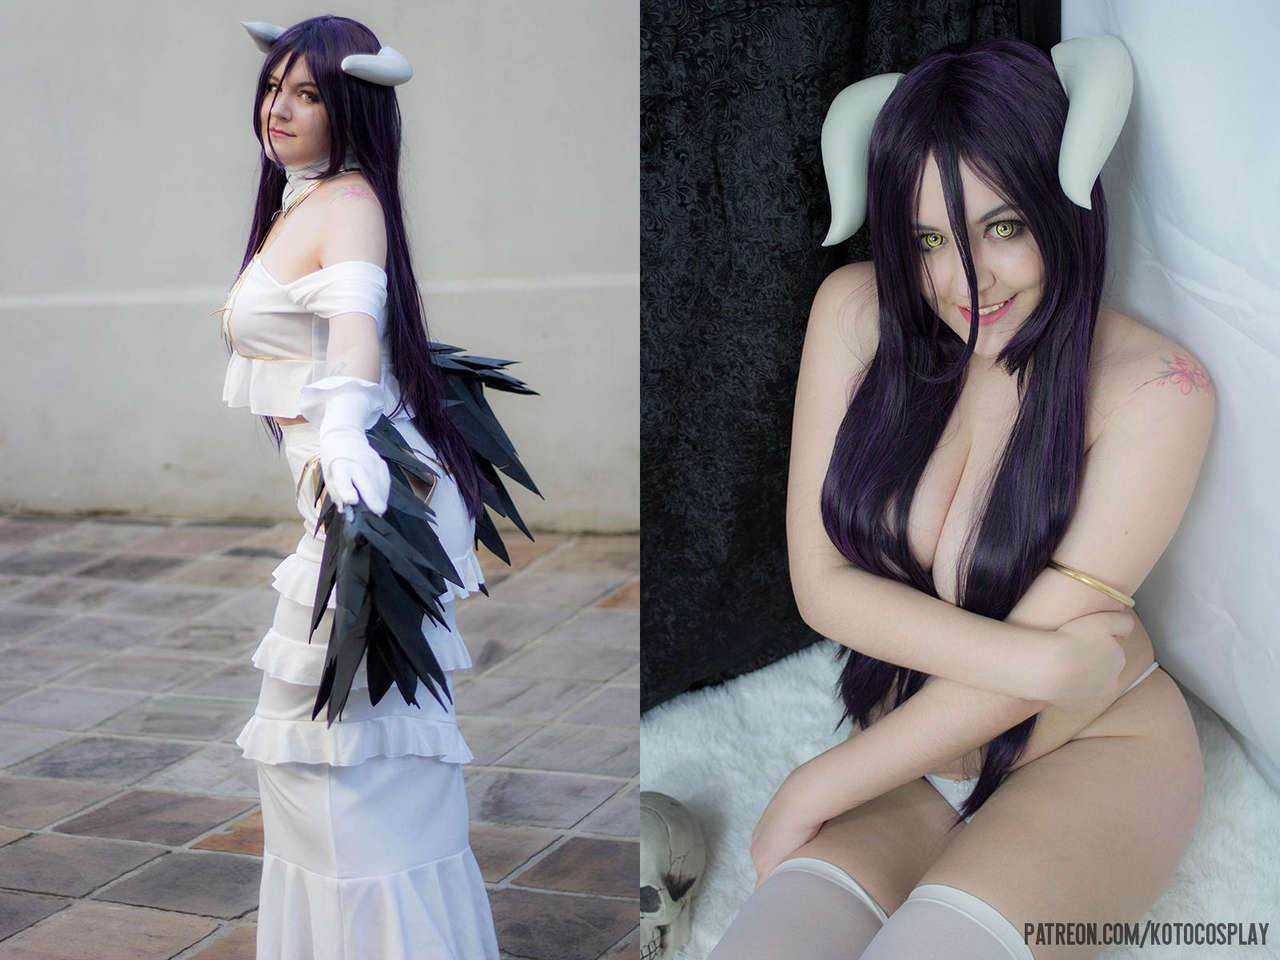 Self Albedo On Off By Koto Cospla